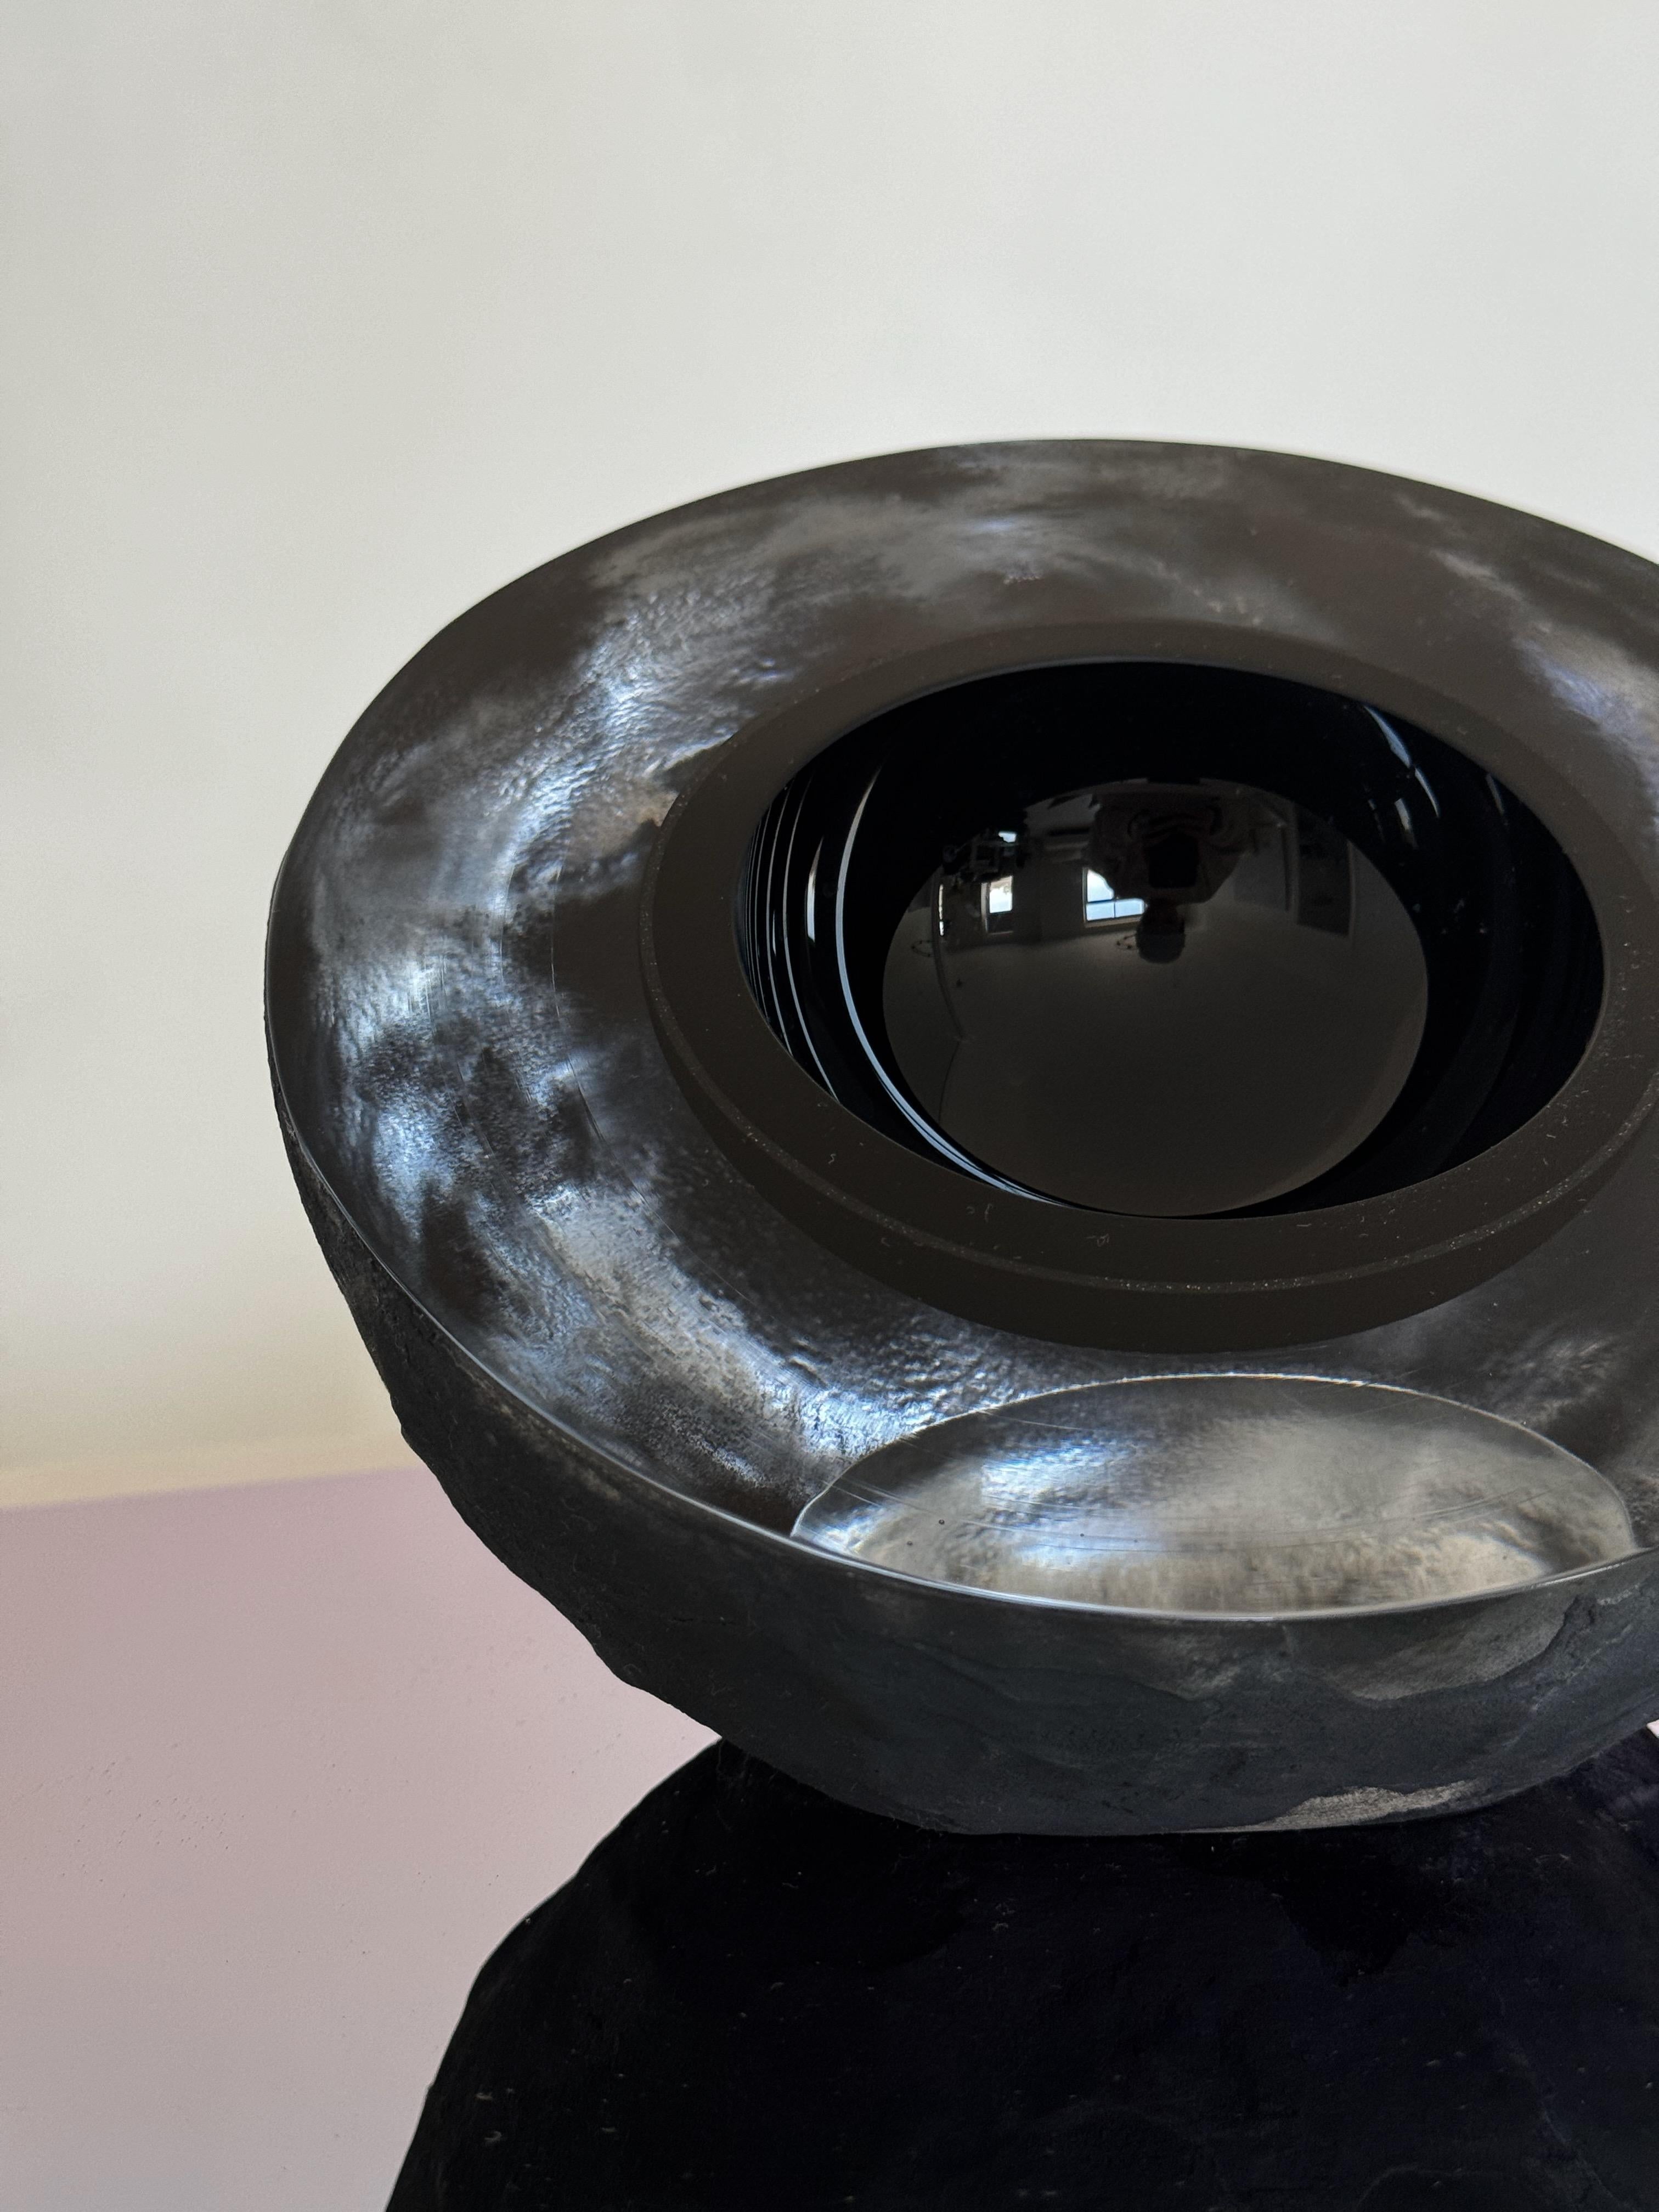 Highest quality, extra-clear glass in ice like effect, coated in black 'lava'.
Author's technique developed together with Baiba Glass.
Unique object with multiple functions - a bowl, a sculpture, an offering dish. 
It has one polished edge that